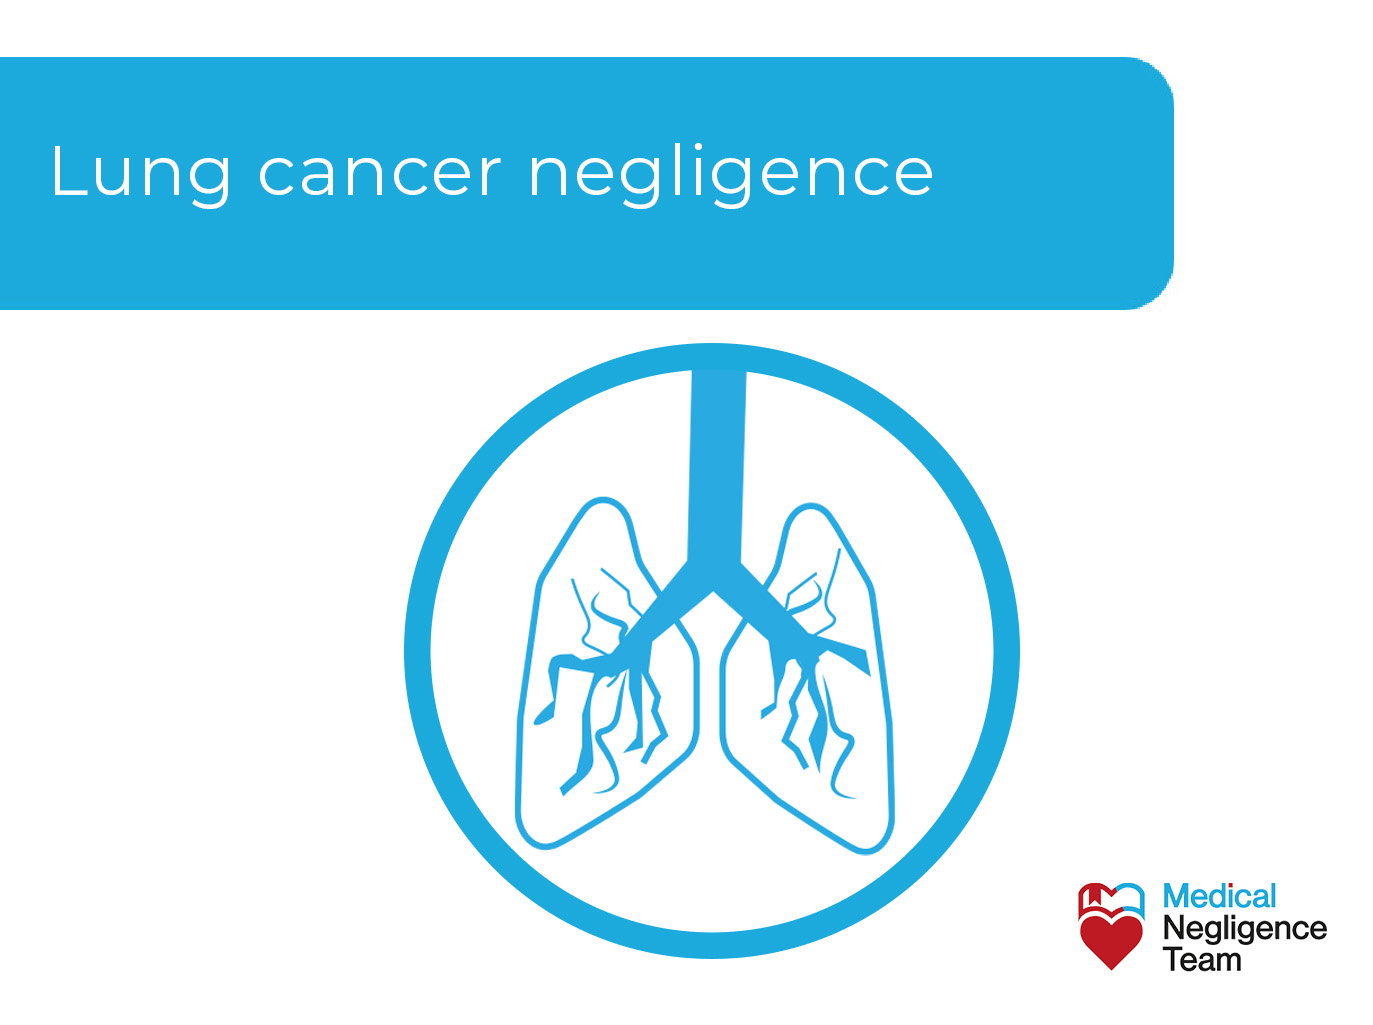 Lung cancer negligence